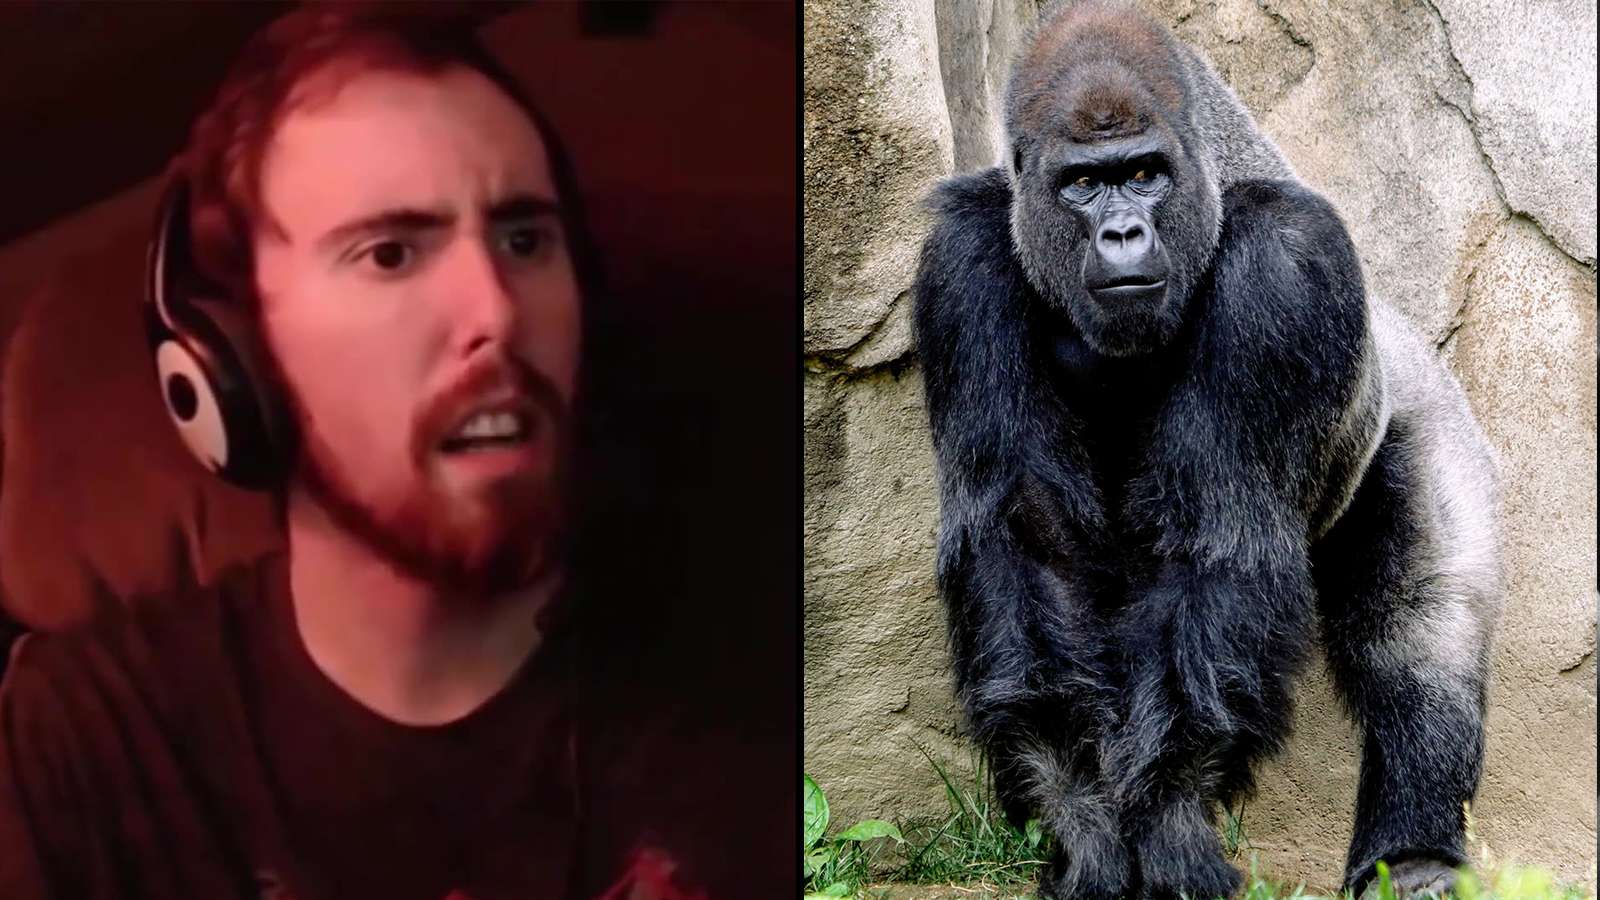 Asmongold streaming on Twitch alongisde a picture of a gorilla.